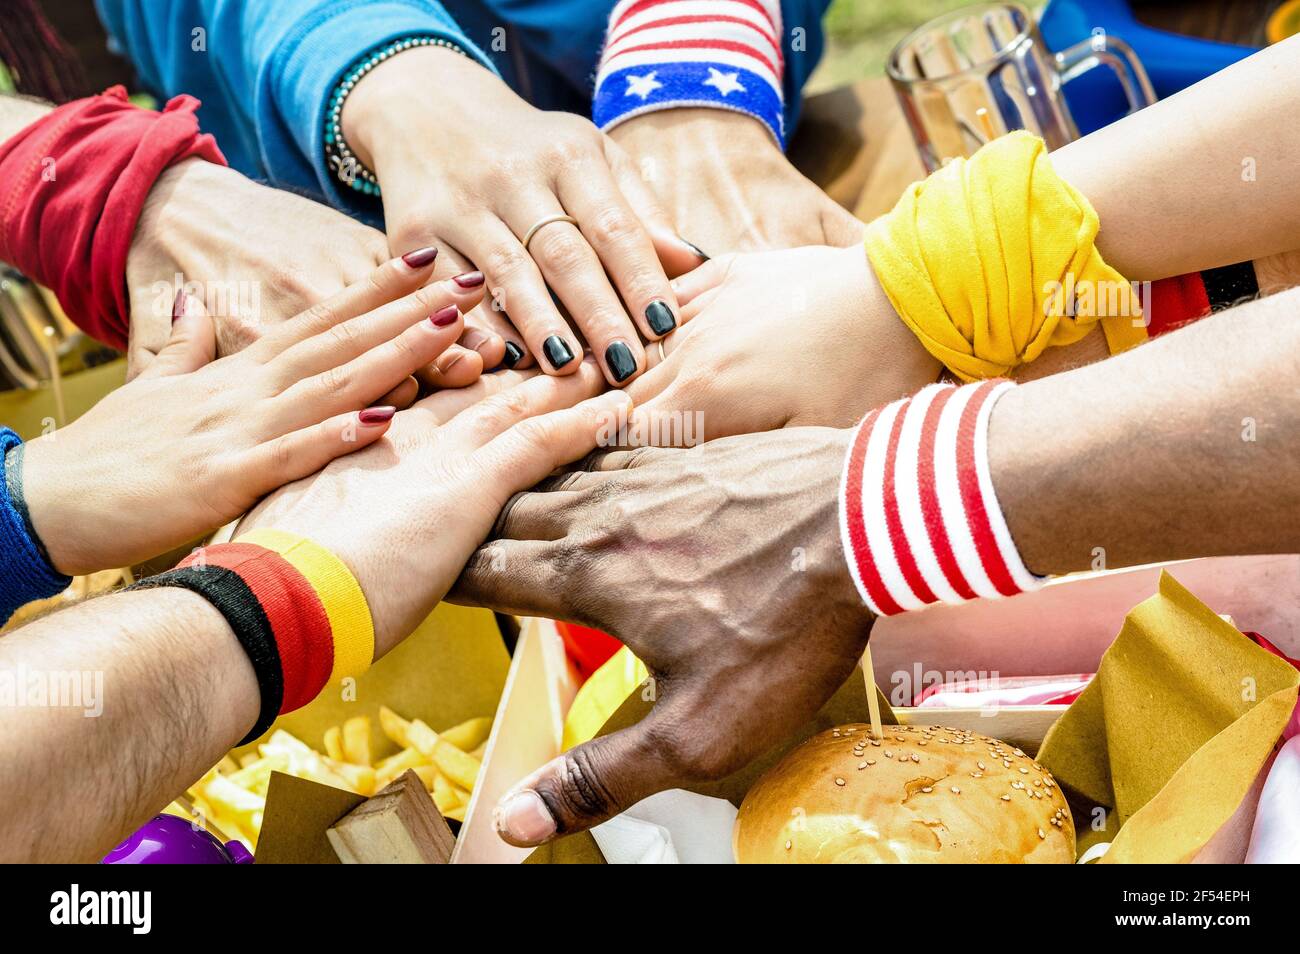 Top side view of multiracial hands of football supporter friend sharing street food - Friendship concept with soccer fan enjoying food together Stock Photo